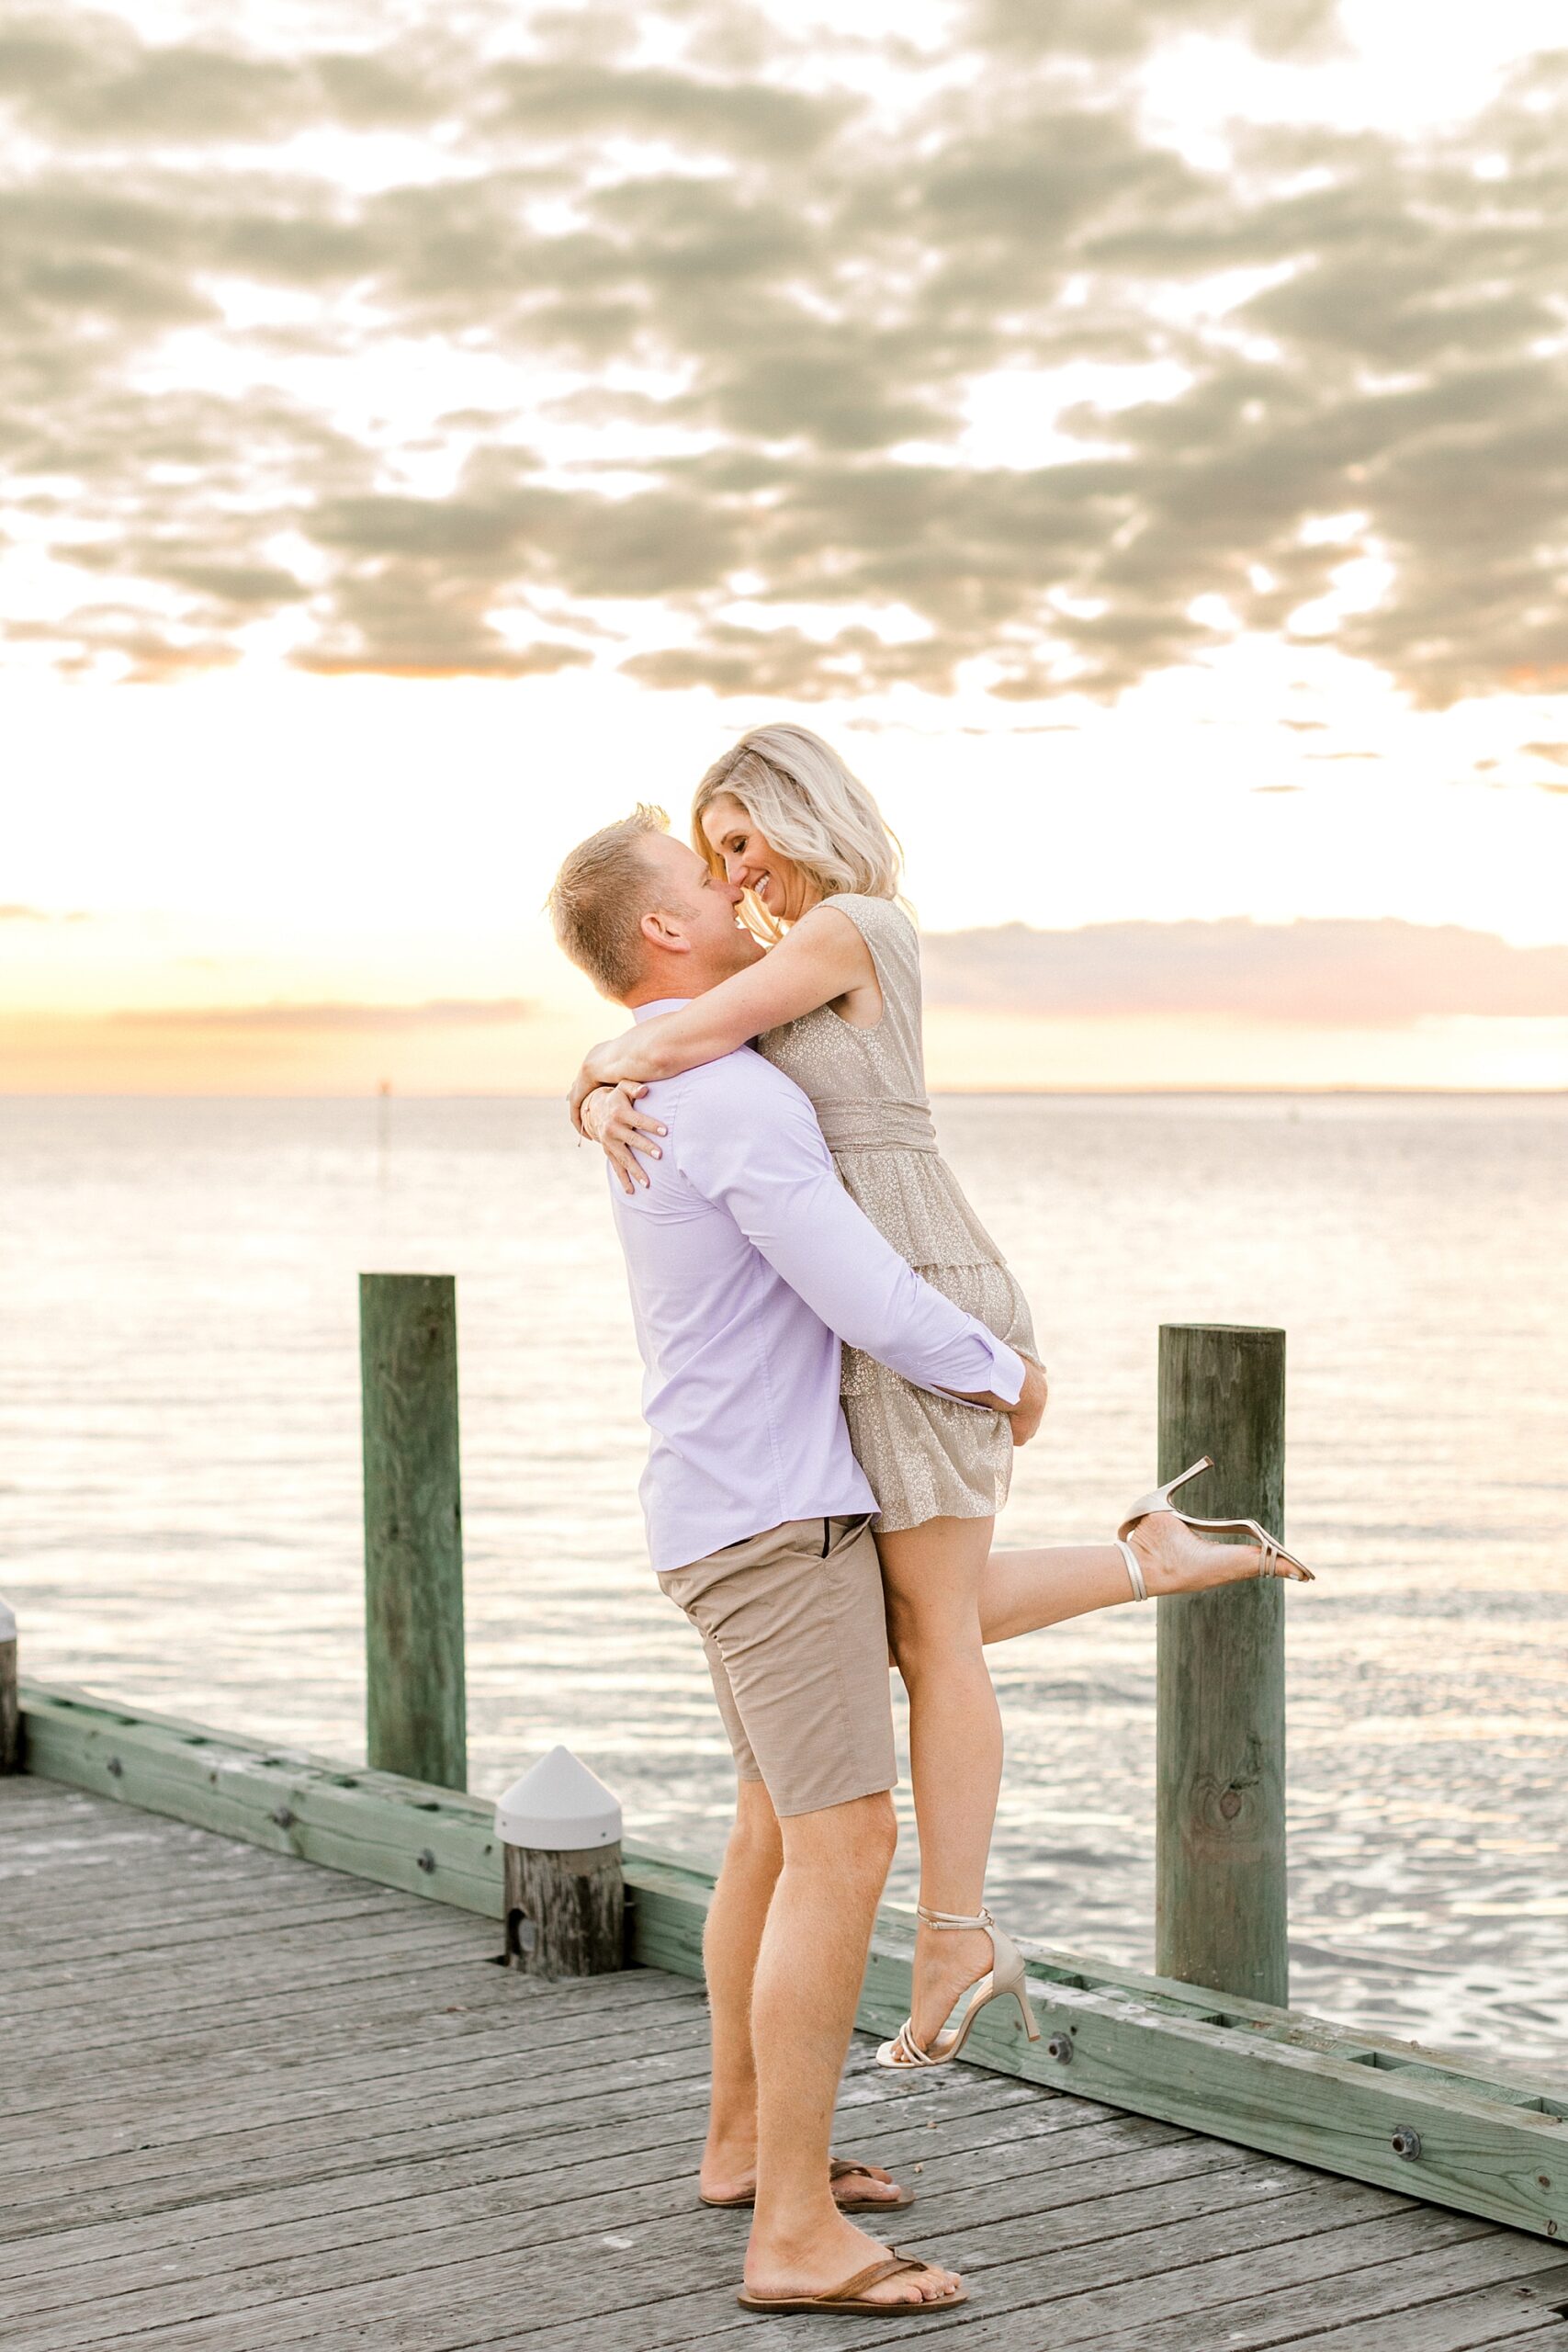 man lifts up woman during Brant Beach engagement session on dock